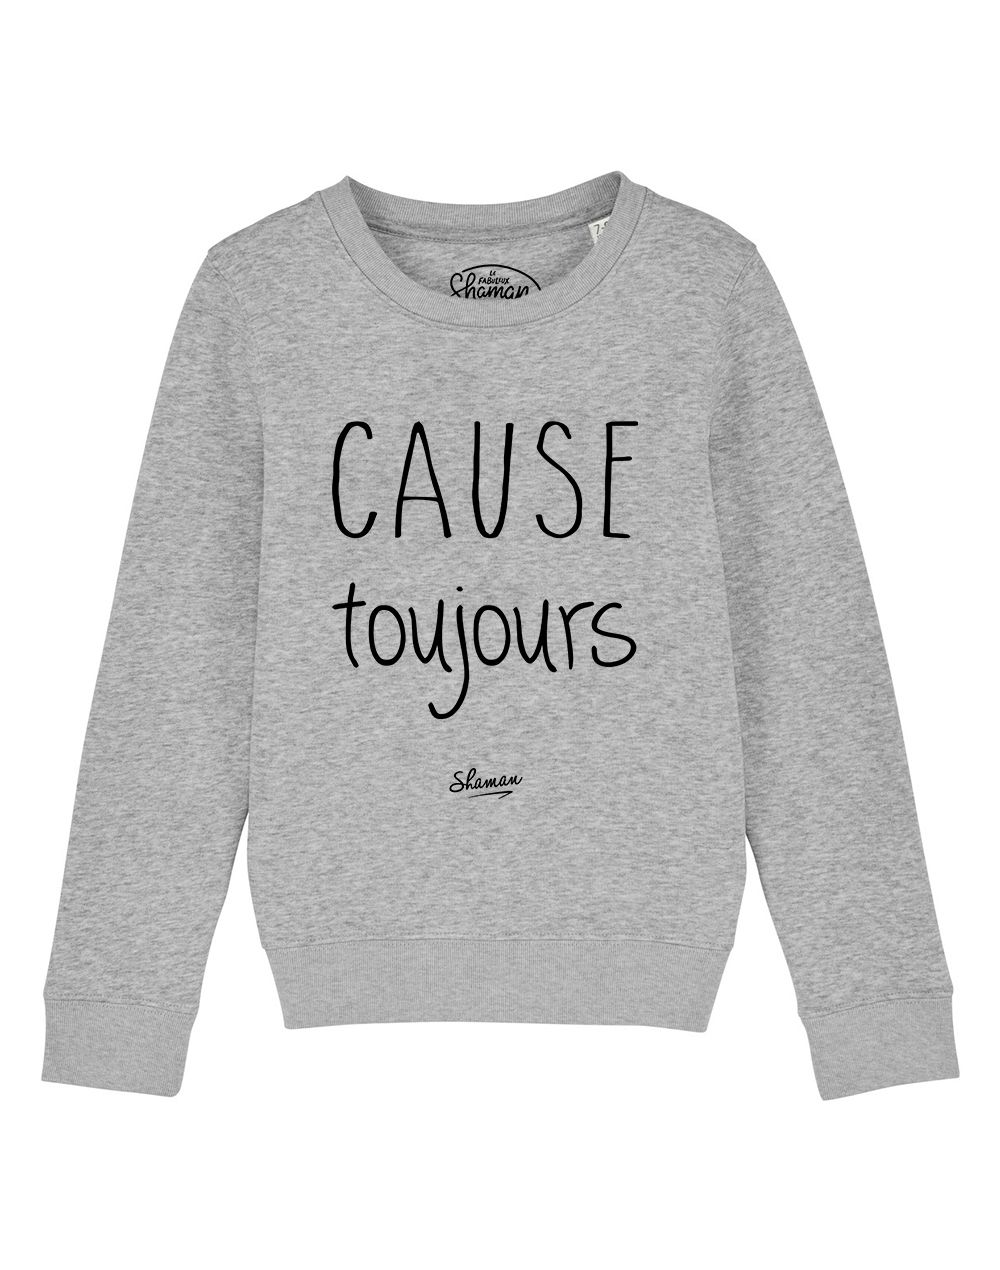 sweat "cause toujours"